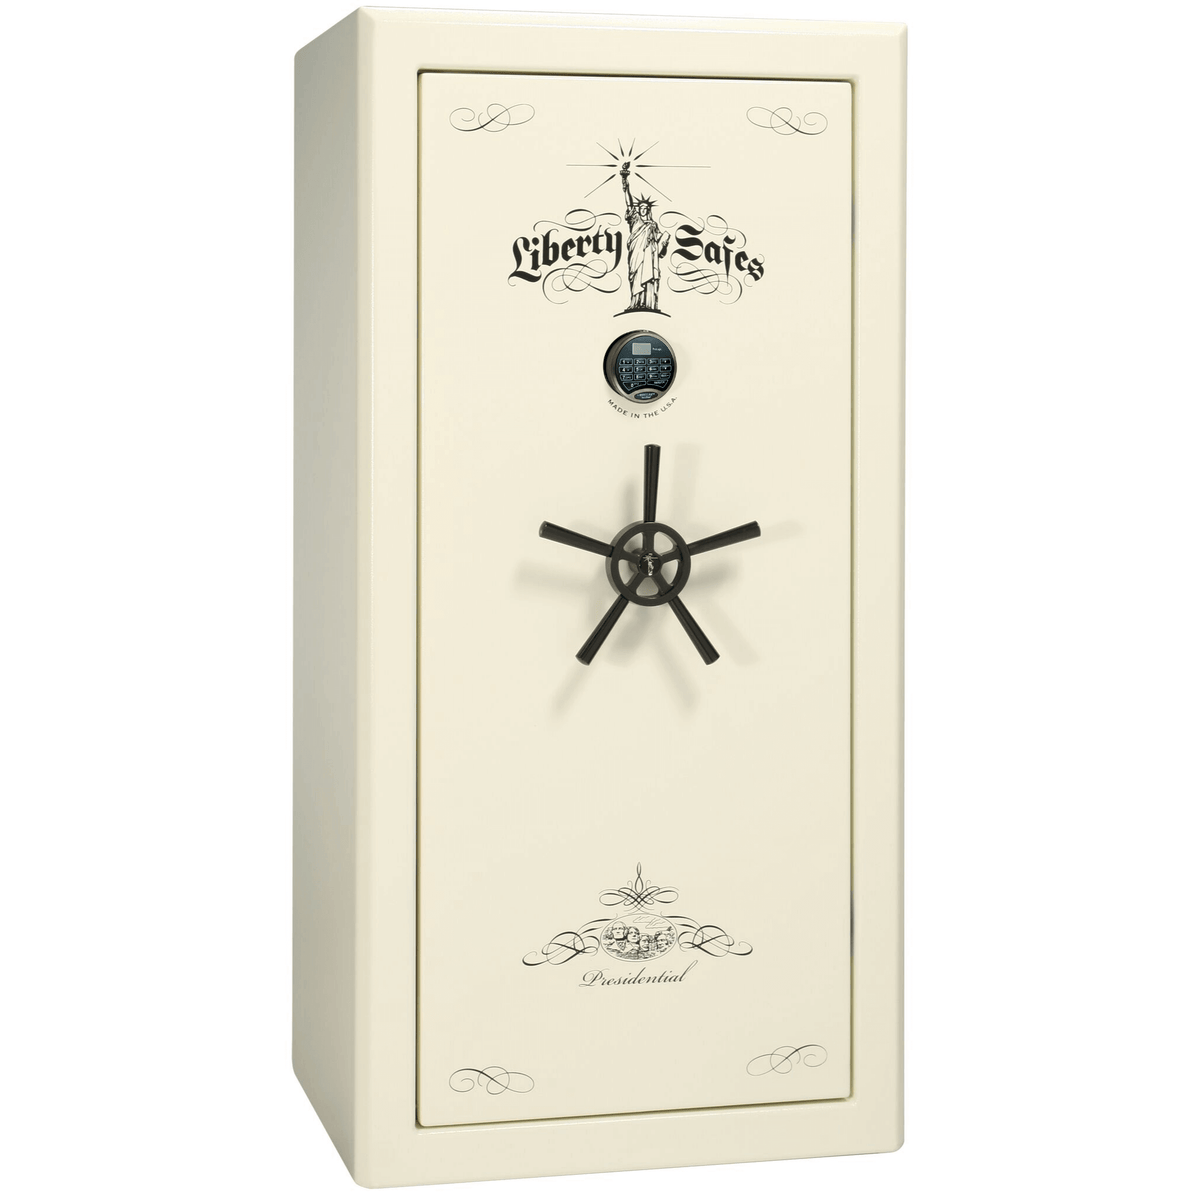 Liberty Safe Presidential 25 in White Marble with Black Chrome Electronic Lock, closed door.